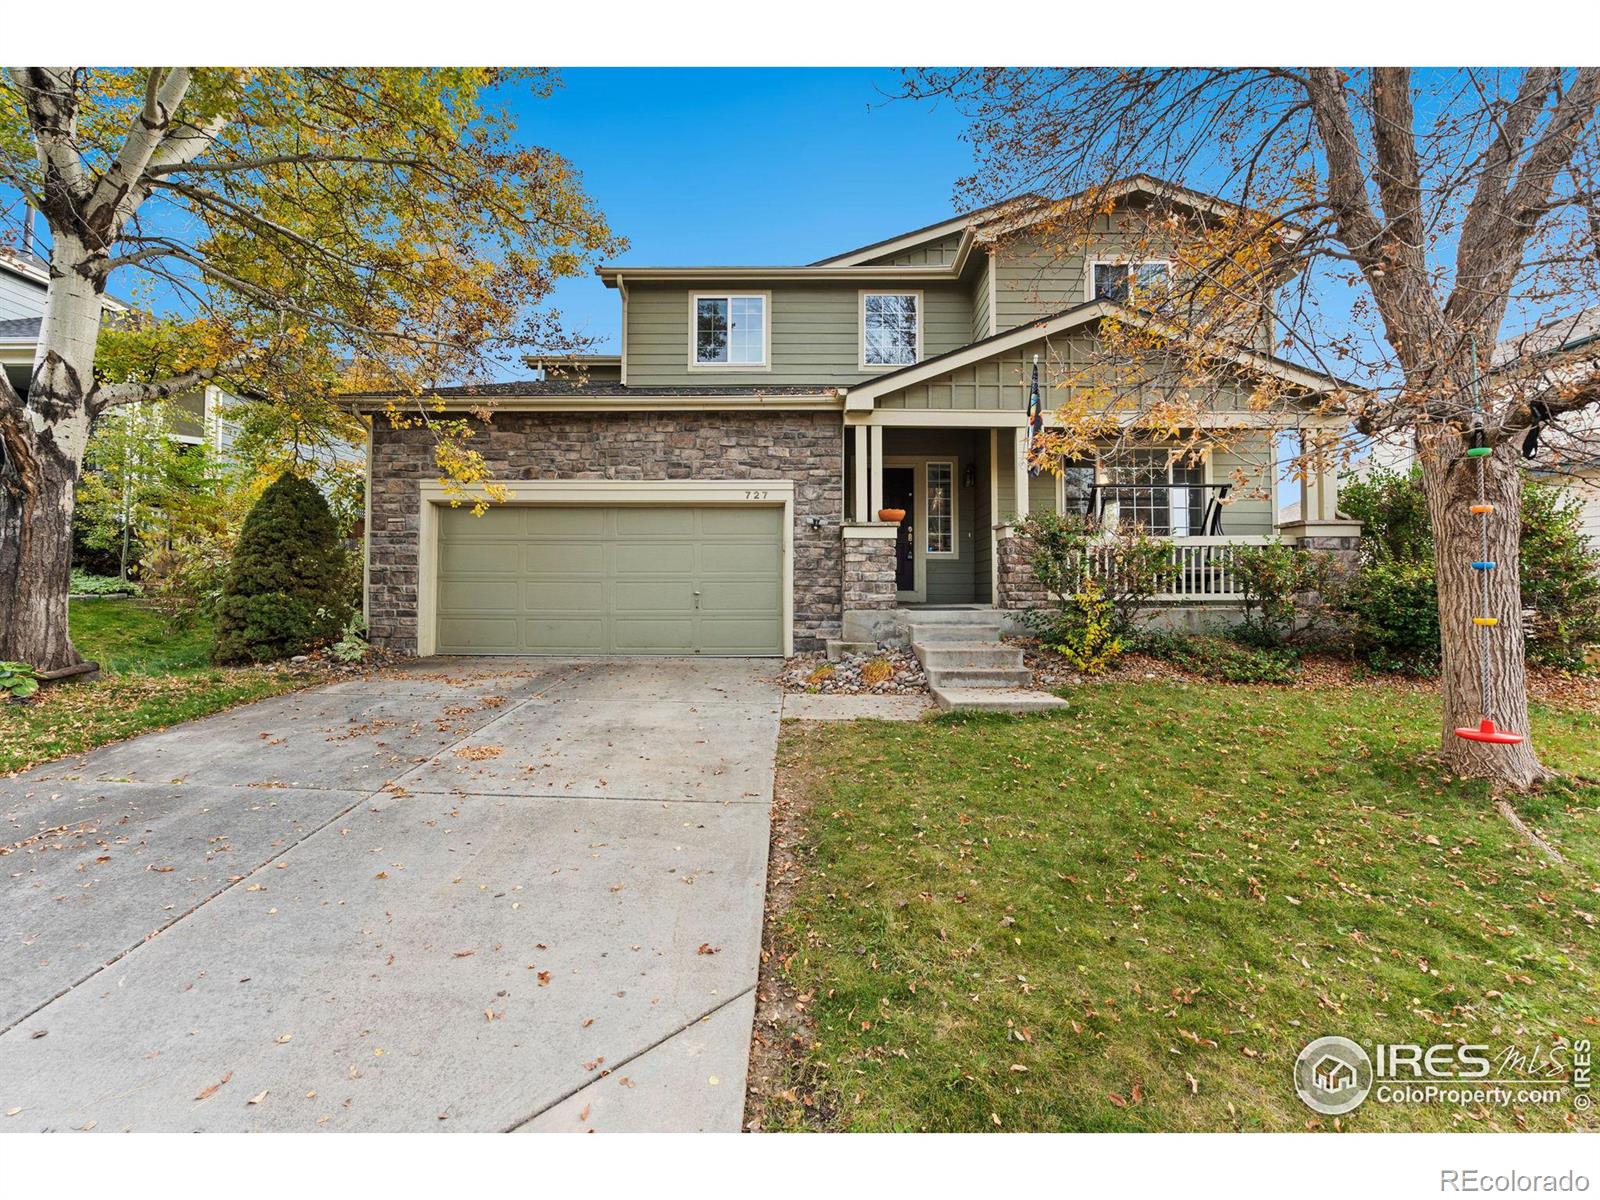 727  Rocky Mountain Place, longmont MLS: 456789998723 Beds: 4 Baths: 3 Price: $650,000